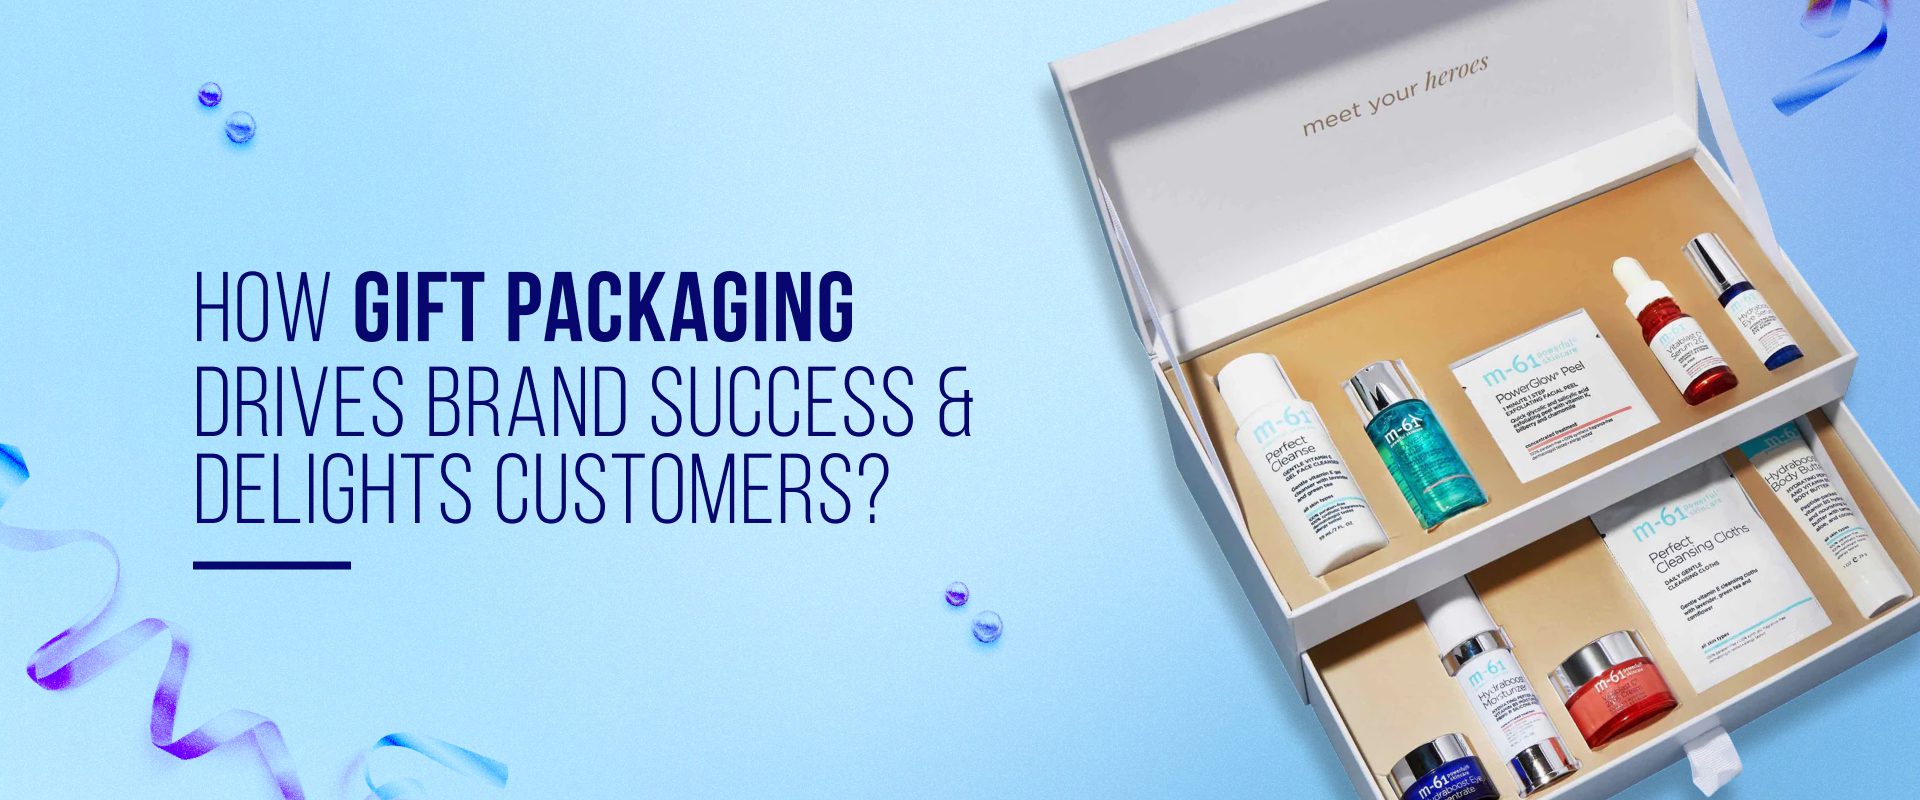 How Gift Packaging Drives Brand Success & Delights Customers?